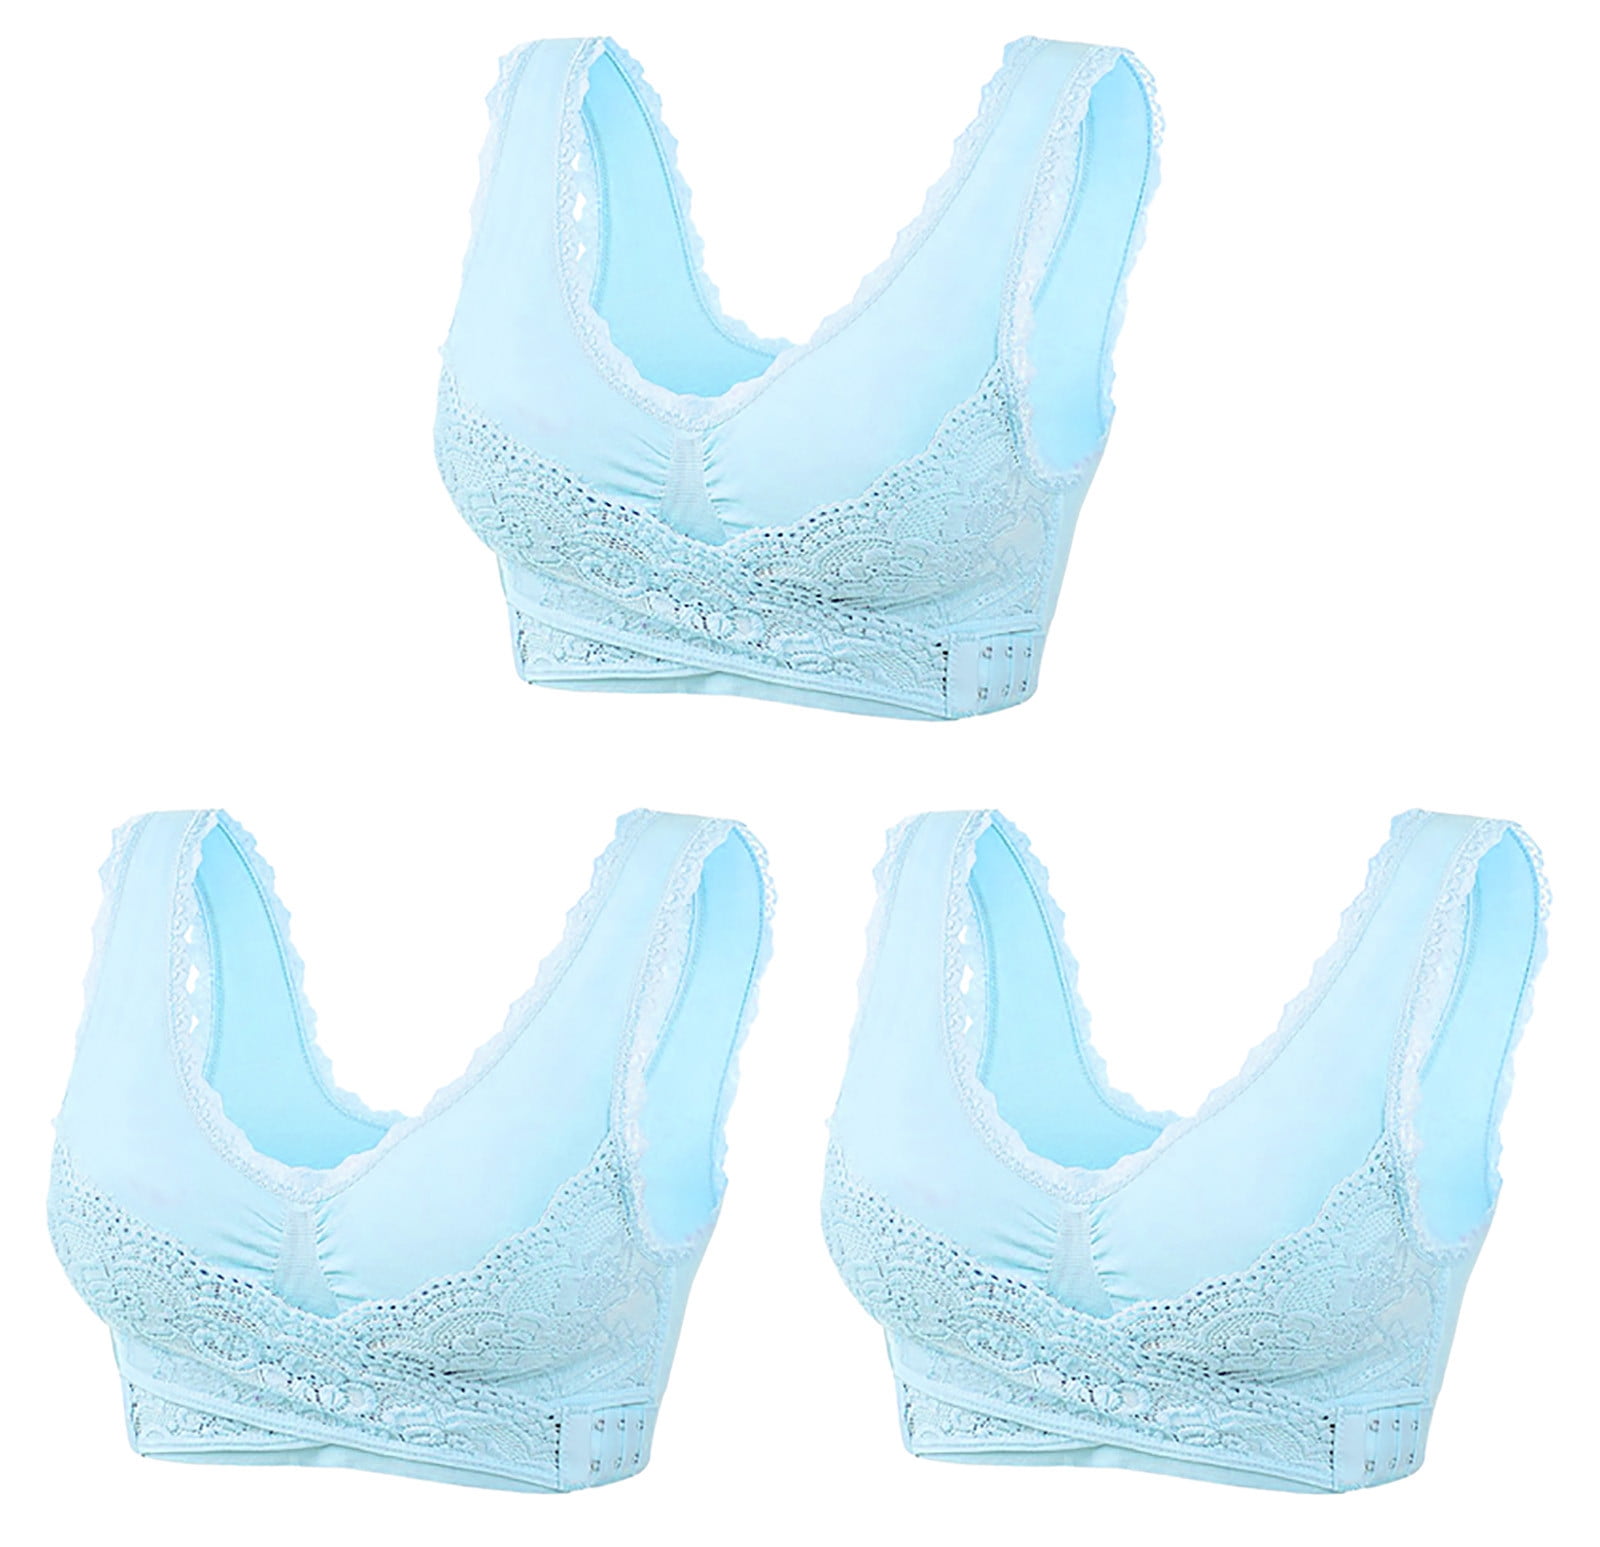 Kendally Bra, Front Criss Cross Bras Side Buckle Lace Sports Bras Wireless  Push Up Seamless Bra with Removable Pad (as1, Alpha, s, Regular, Regular,  Blue) at  Women's Clothing store